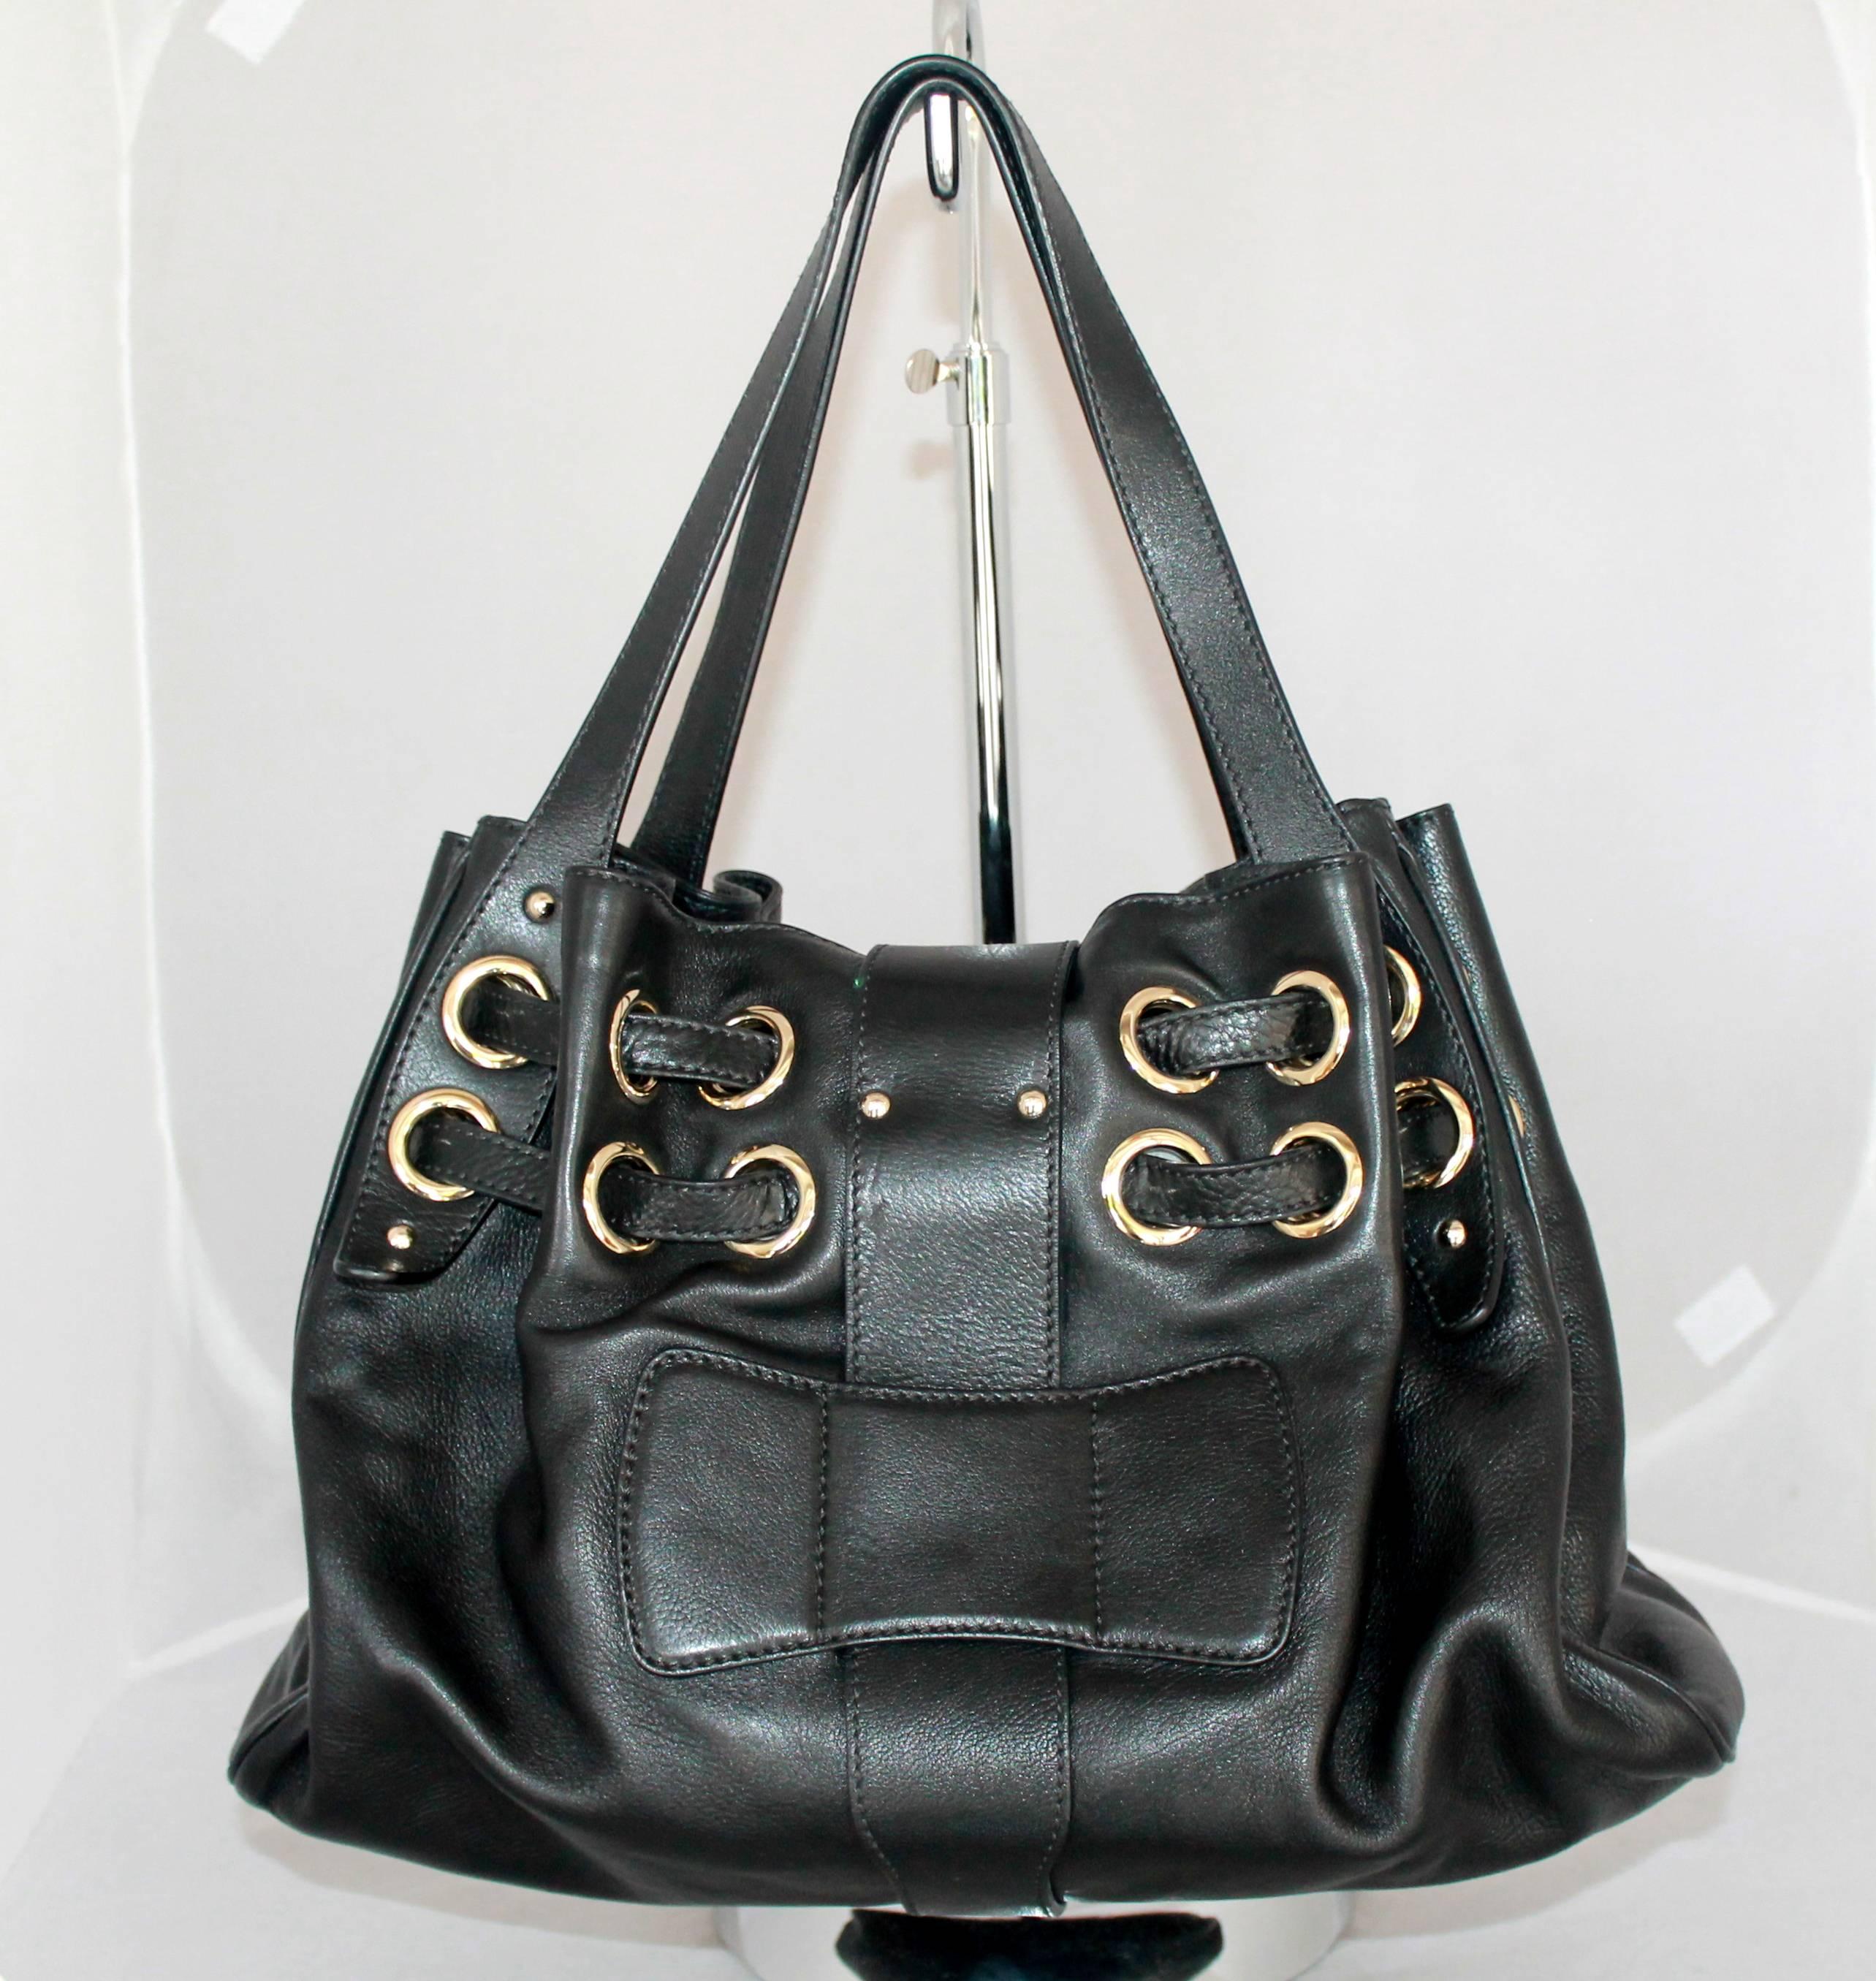 Jimmy Choo Black Leather Ramona Handbag - GHW.  This beautiful handbag is in excellent condition.  It has light gold hardware, and grommets with leather woven through.  It has tan suede lining in the interior.

Measurements:
Height: 10